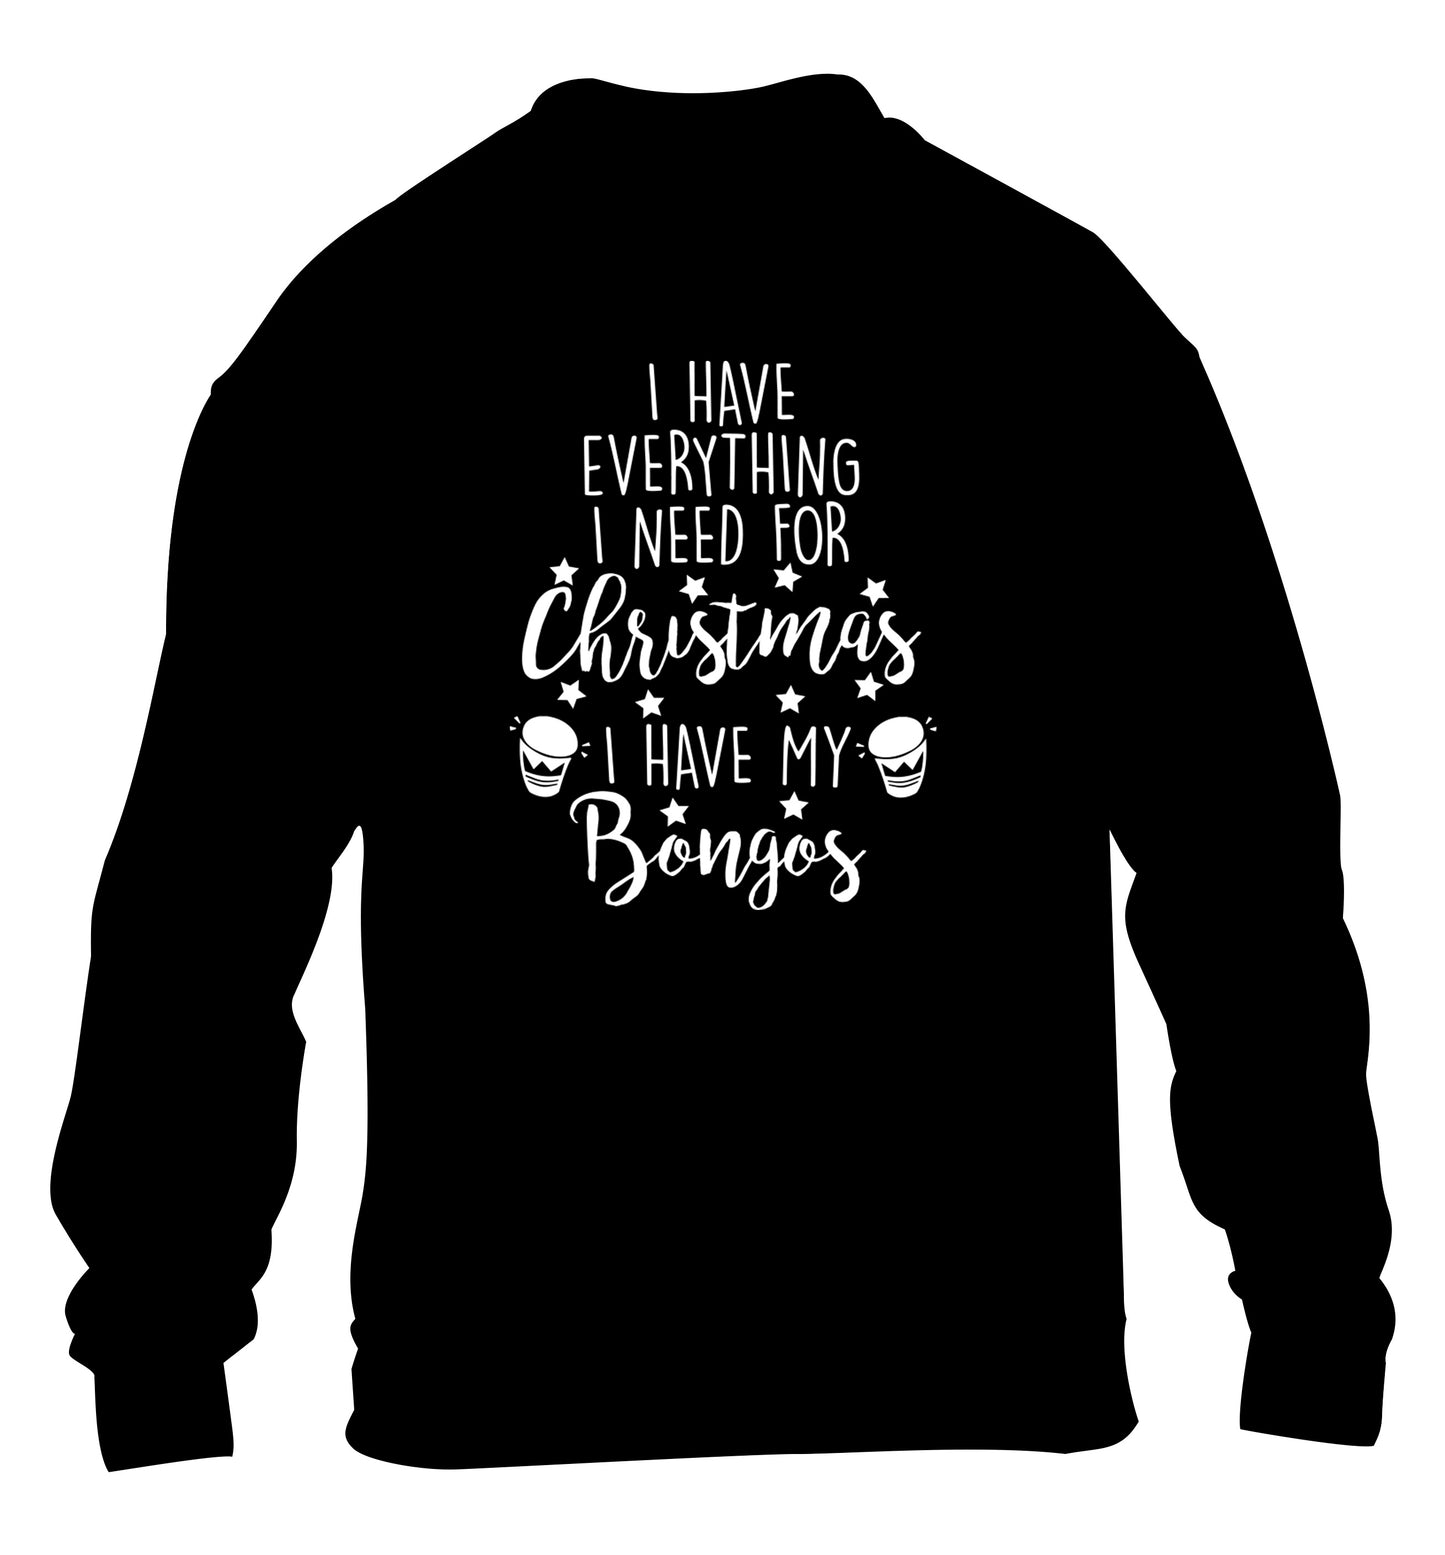 I have everything I need for Christmas I have my bongos! children's black sweater 12-14 Years